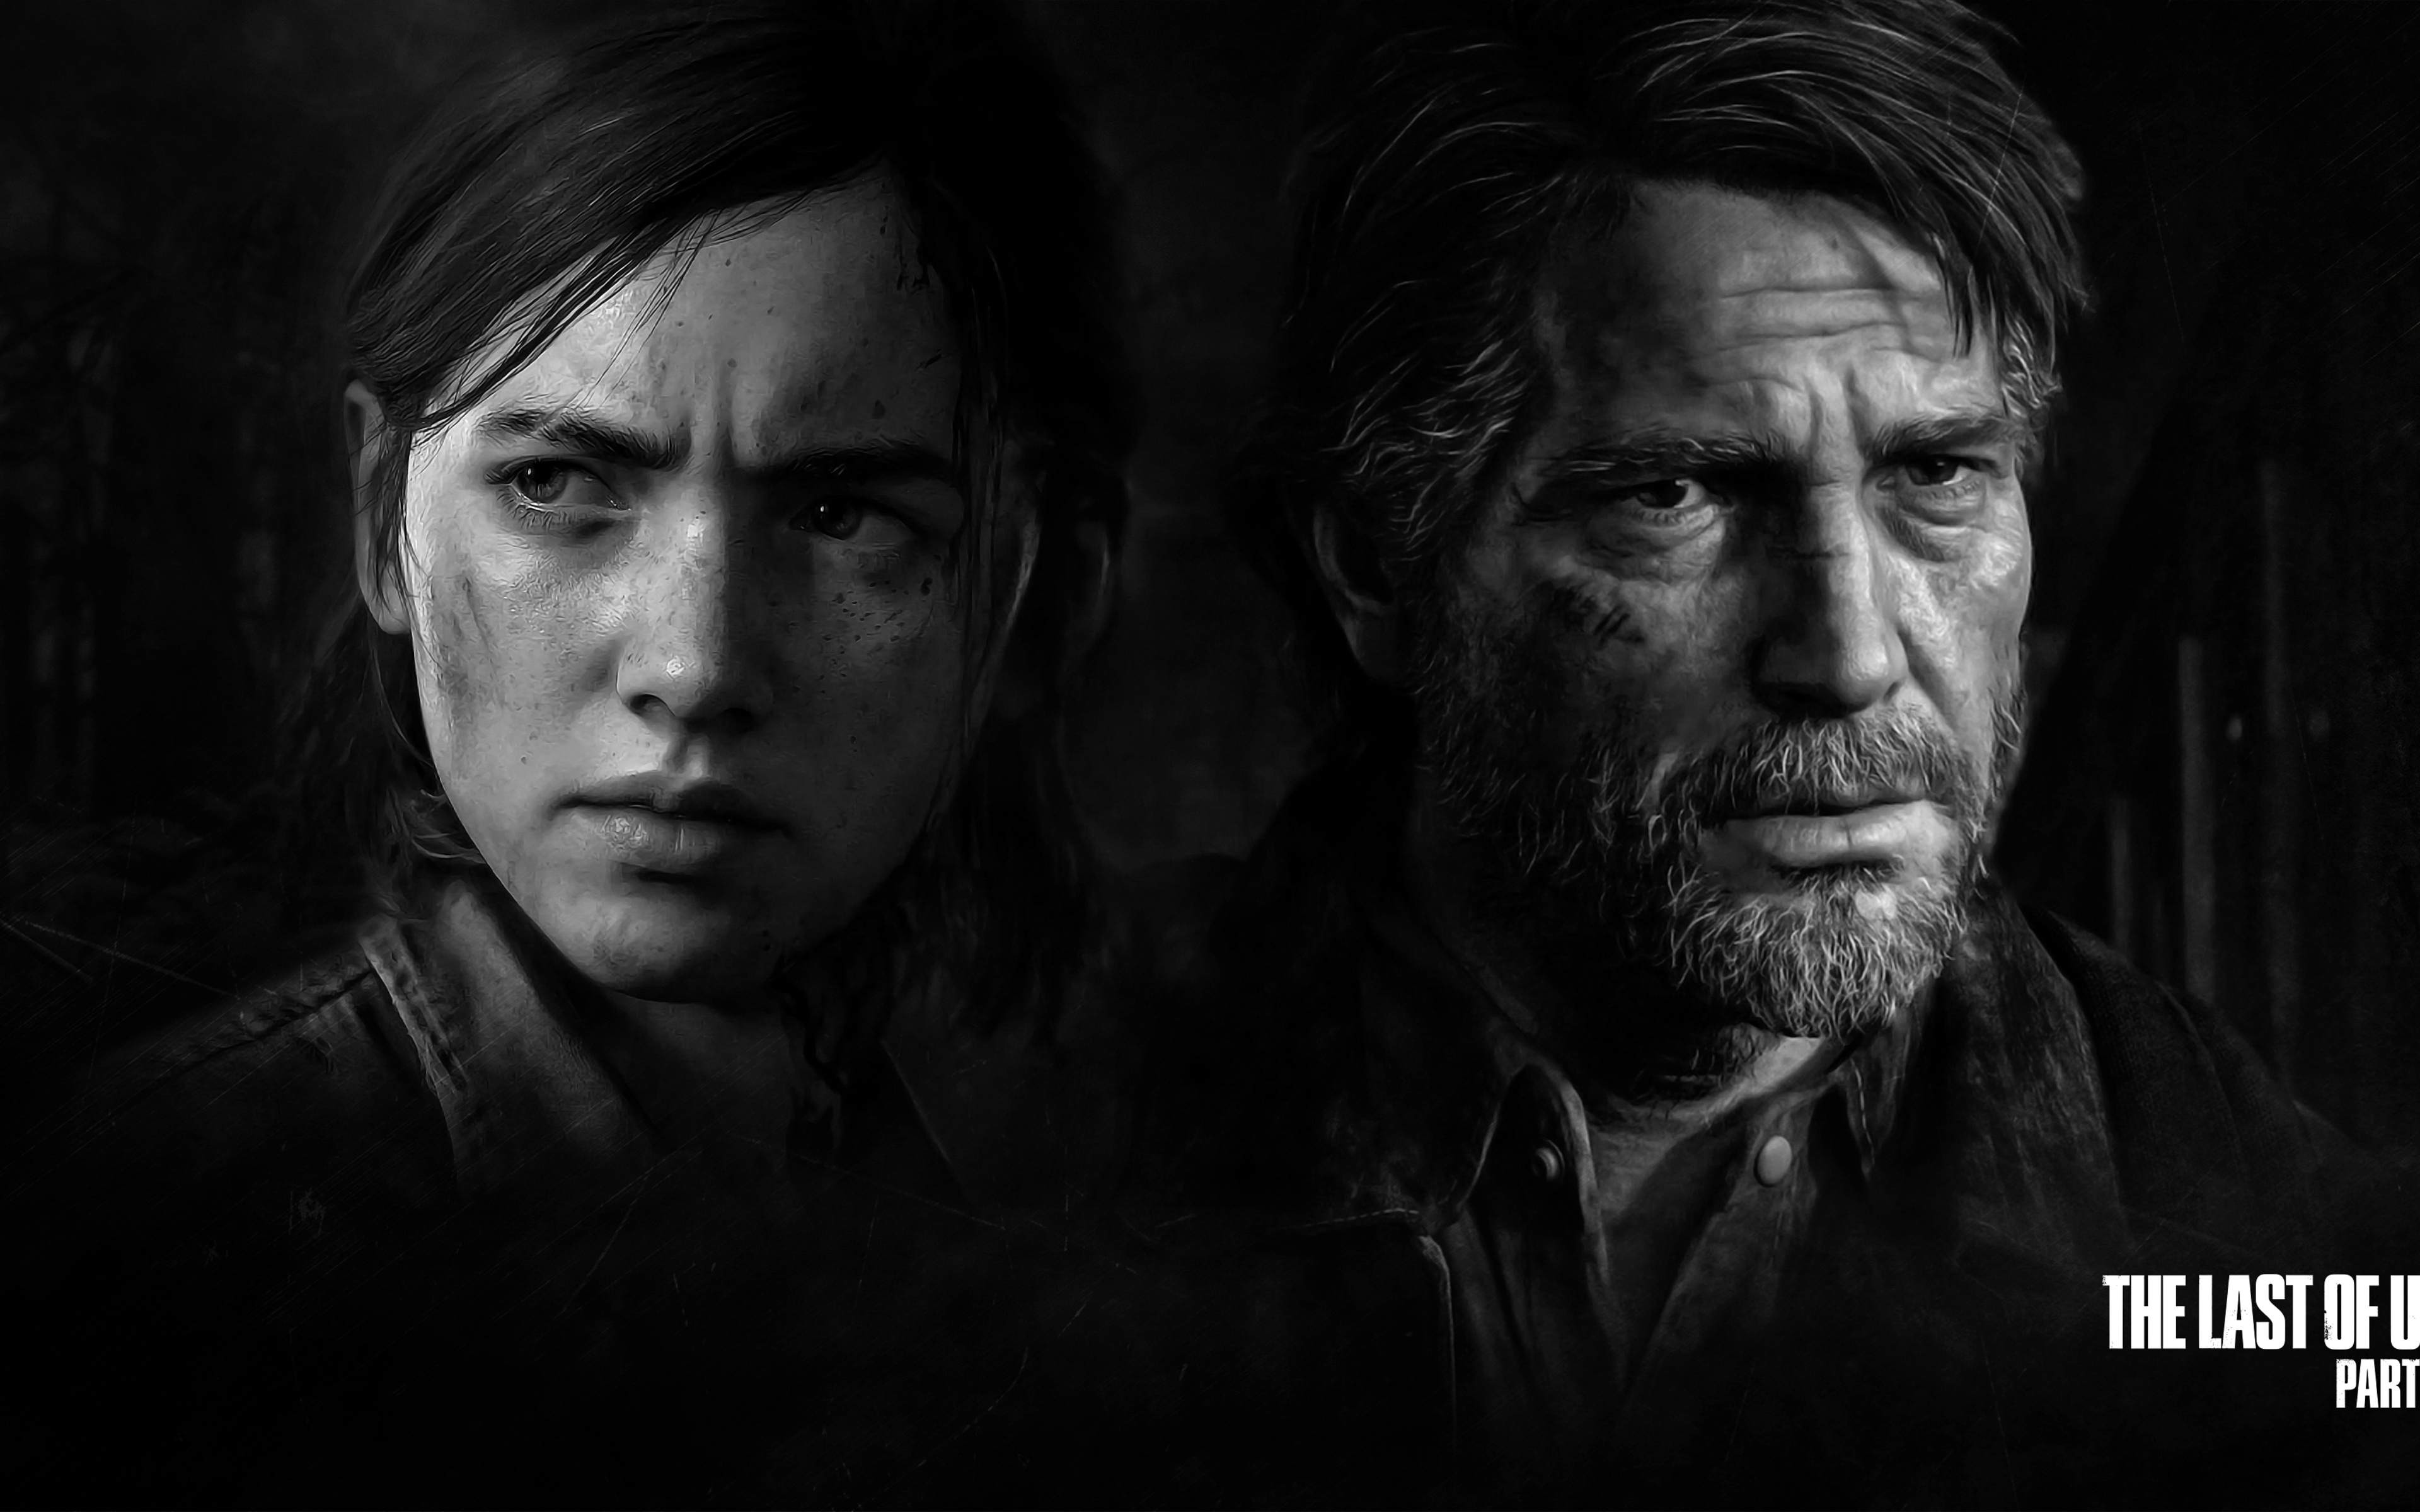 Дата выхода зе ласт. Джоэл the last of us 1.